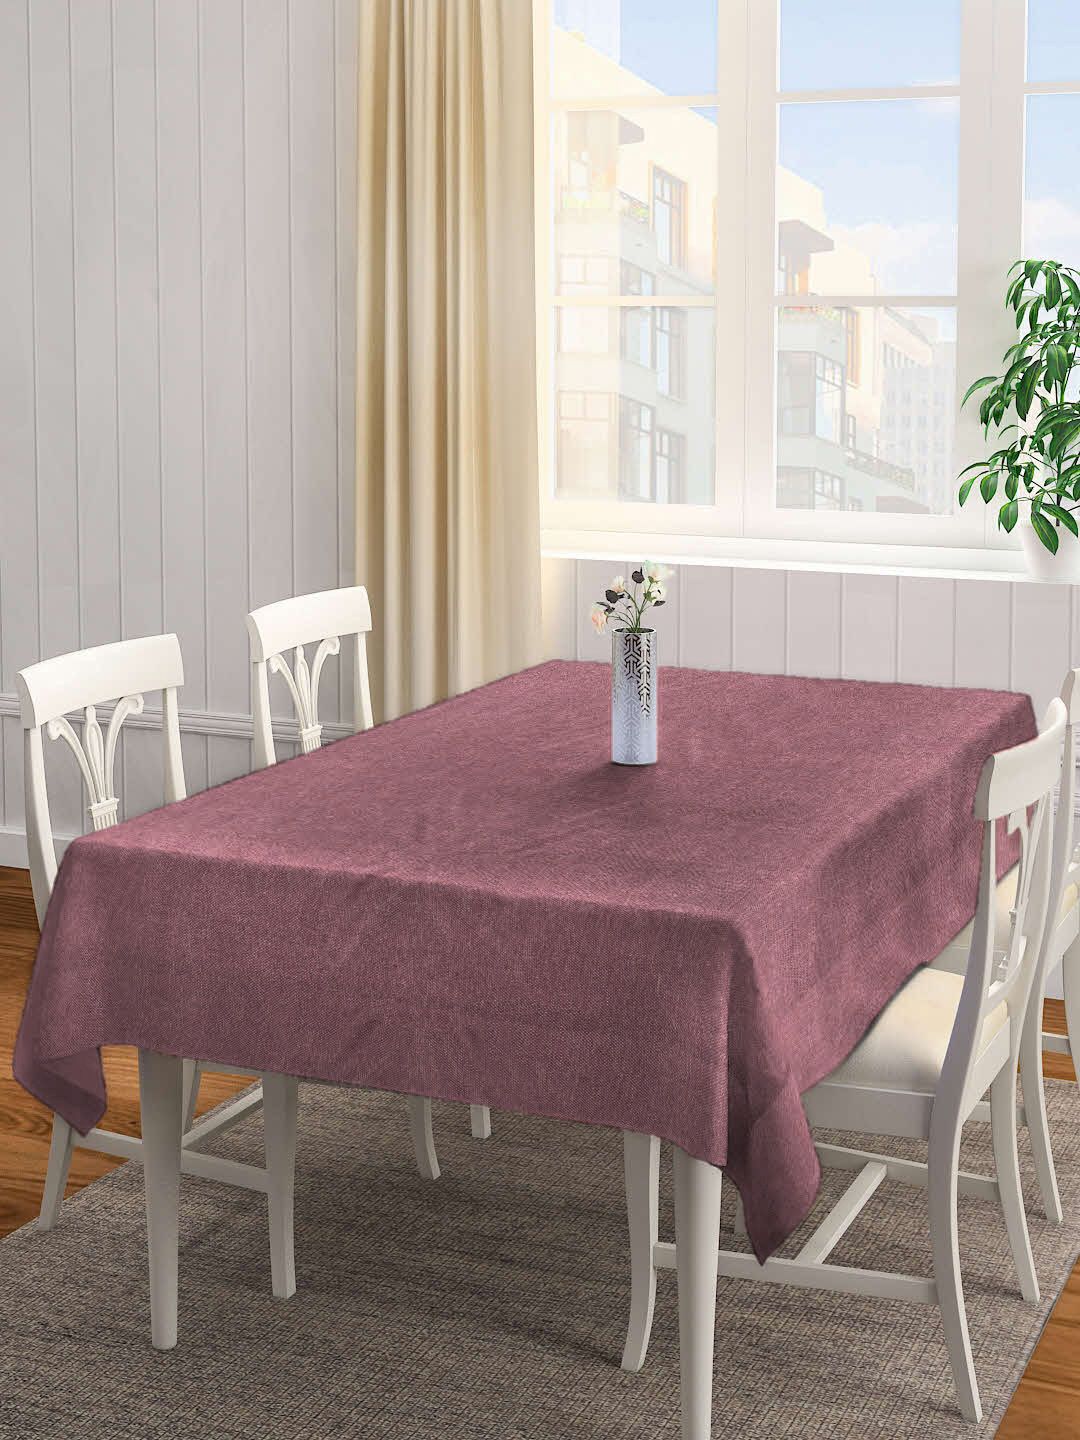 KLOTTHE Rust Woven Design Cotton 6 Seater Rectangular Table Cover Price in India